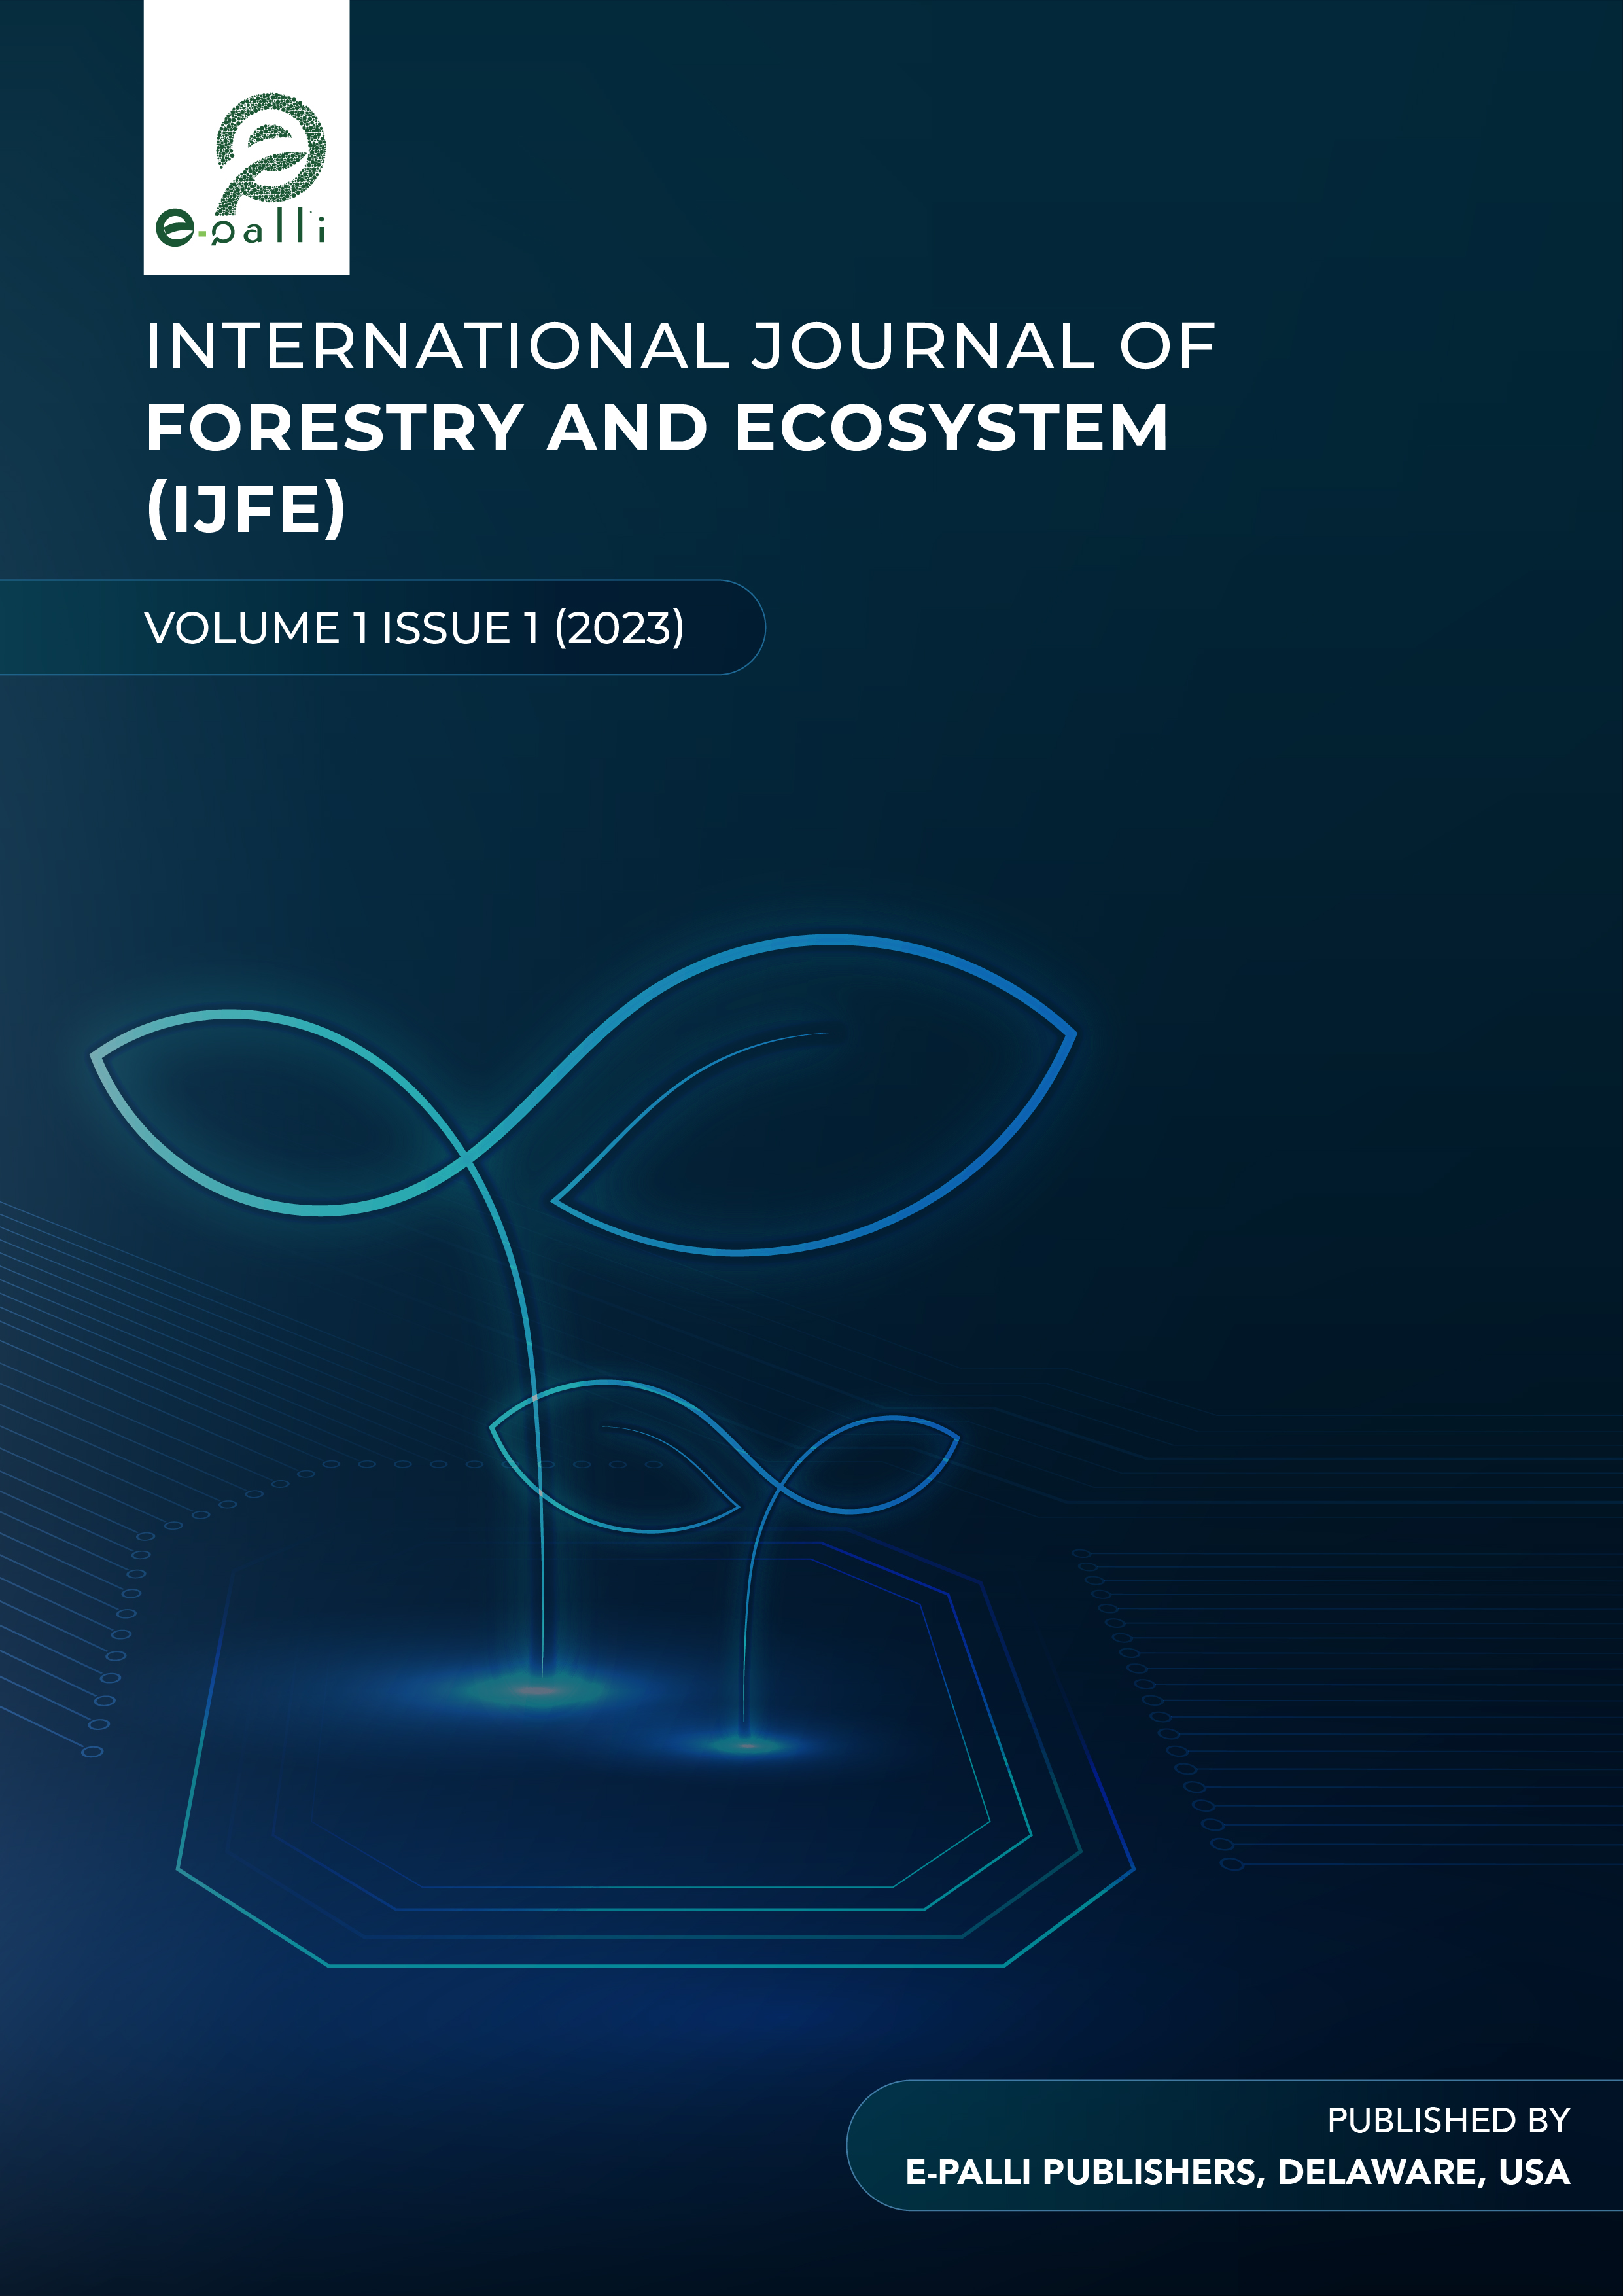                     View Vol. 1 No. 1 (2023): International Journal of Forestry and Ecosystem
                